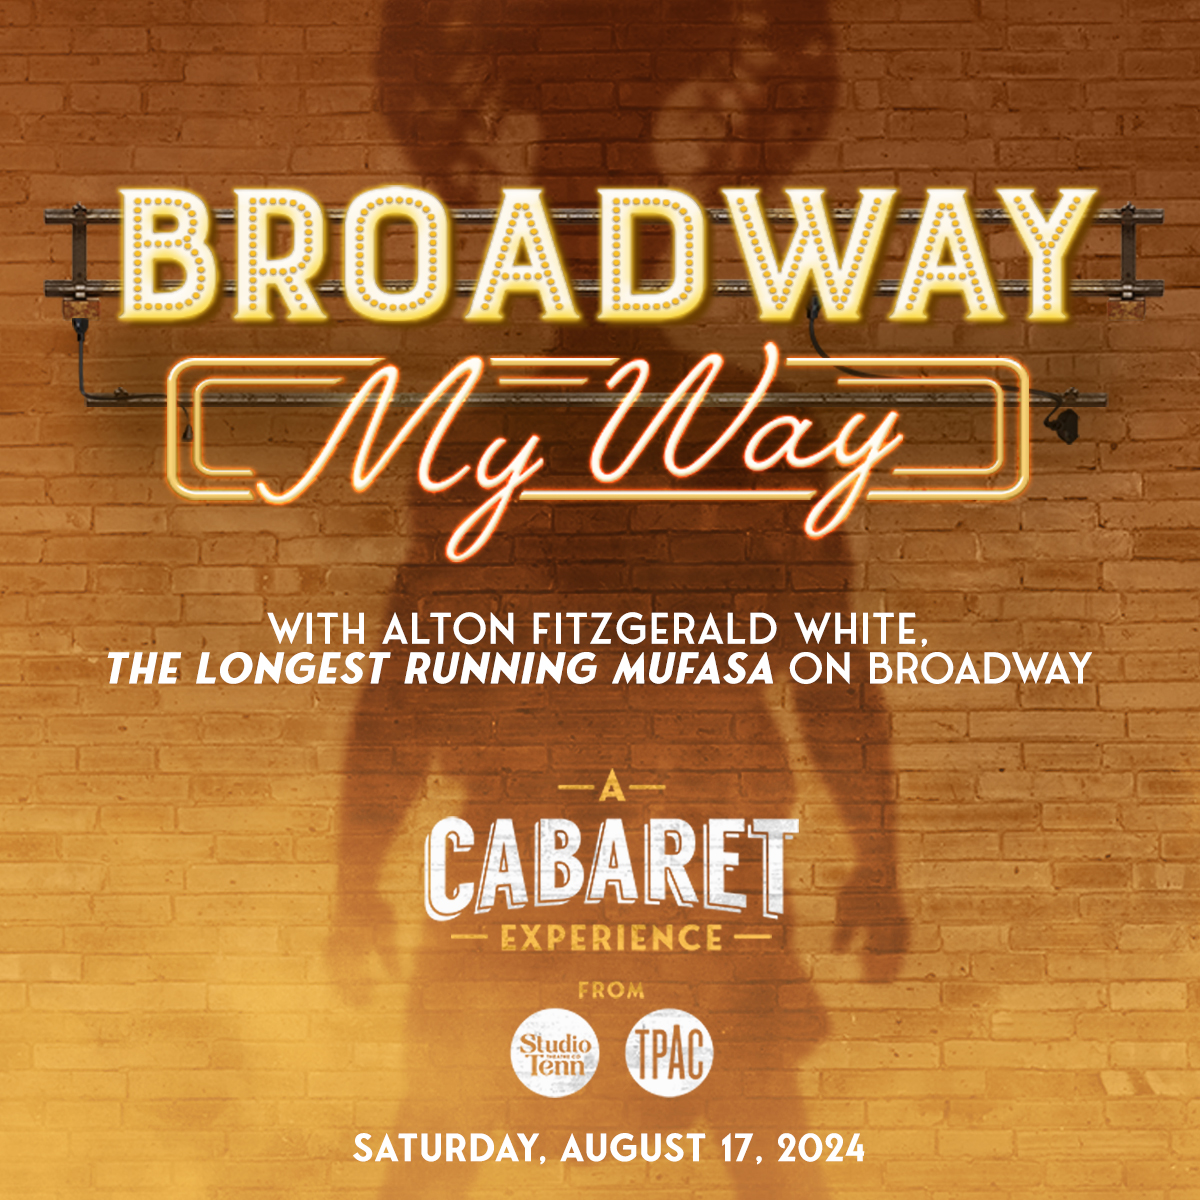 Tickets for A Cabaret Experience presented in partnership with @StudioTenn are on sale now. Buy 2 shows in the series and save 10% or buy all 3 and save 15%. Visit TPAC.ORG to secure your seats today!